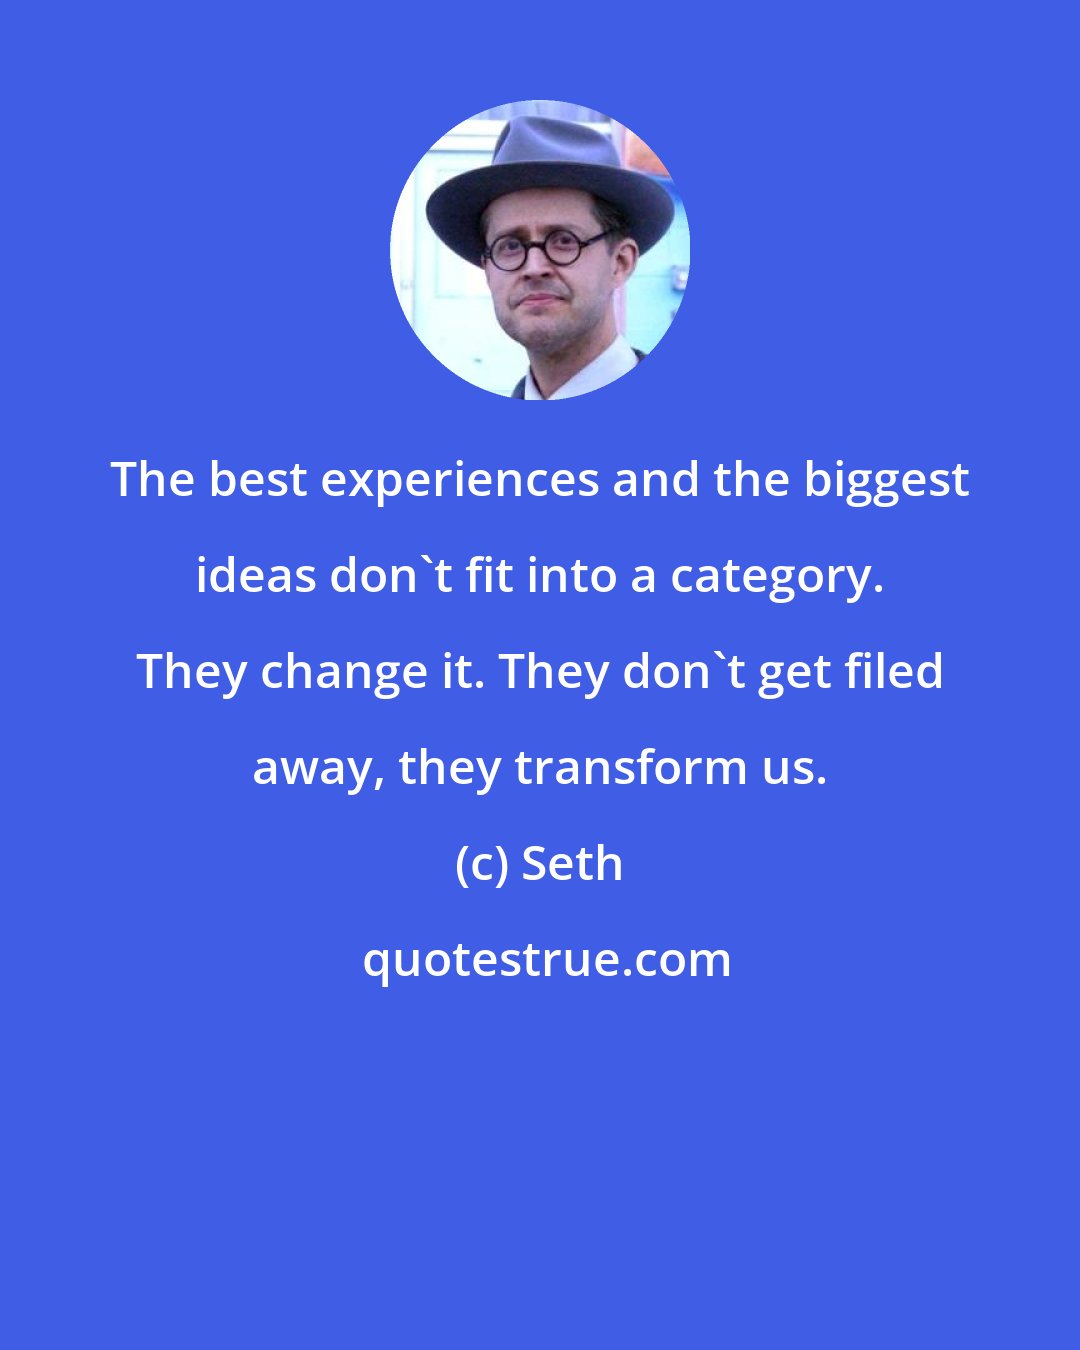 Seth: The best experiences and the biggest ideas don't fit into a category. They change it. They don't get filed away, they transform us.